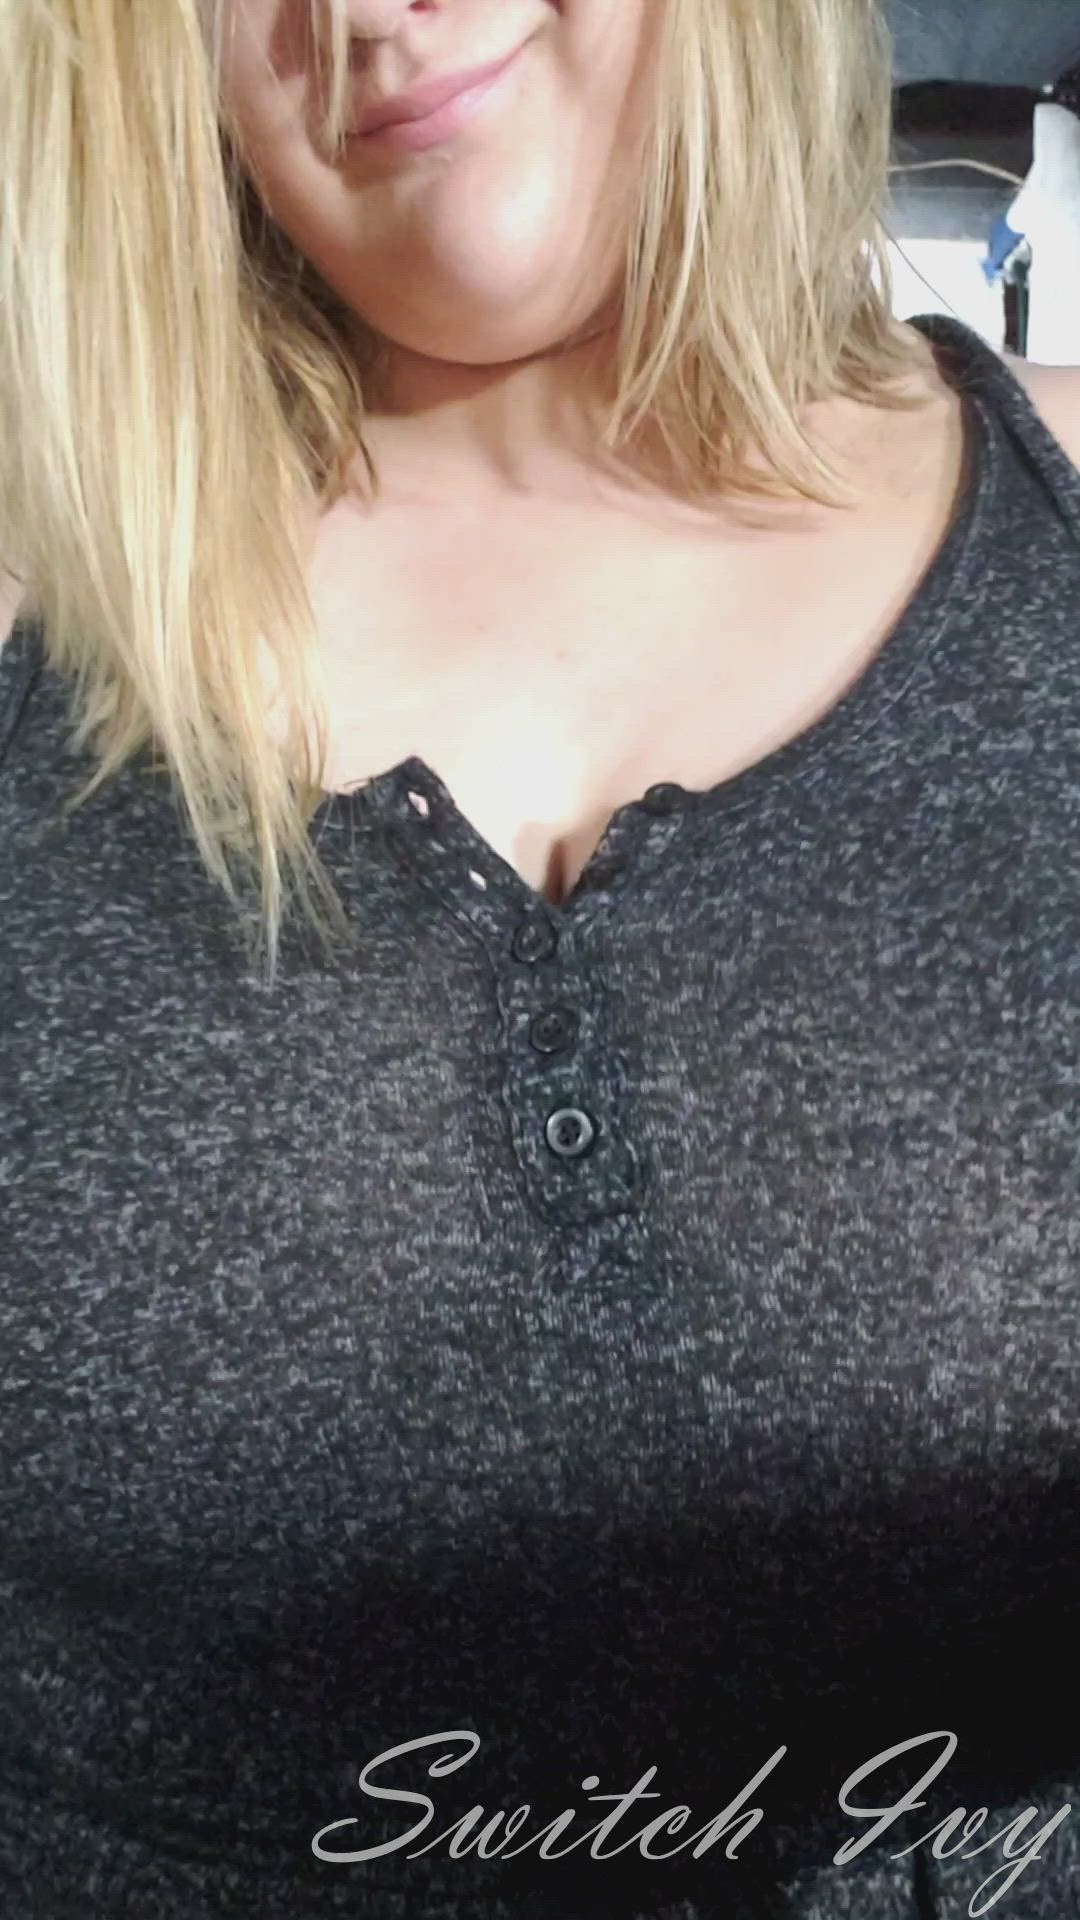 Big Tits porn video with onlyfans model EllieandIvy <strong>@switchivy</strong>